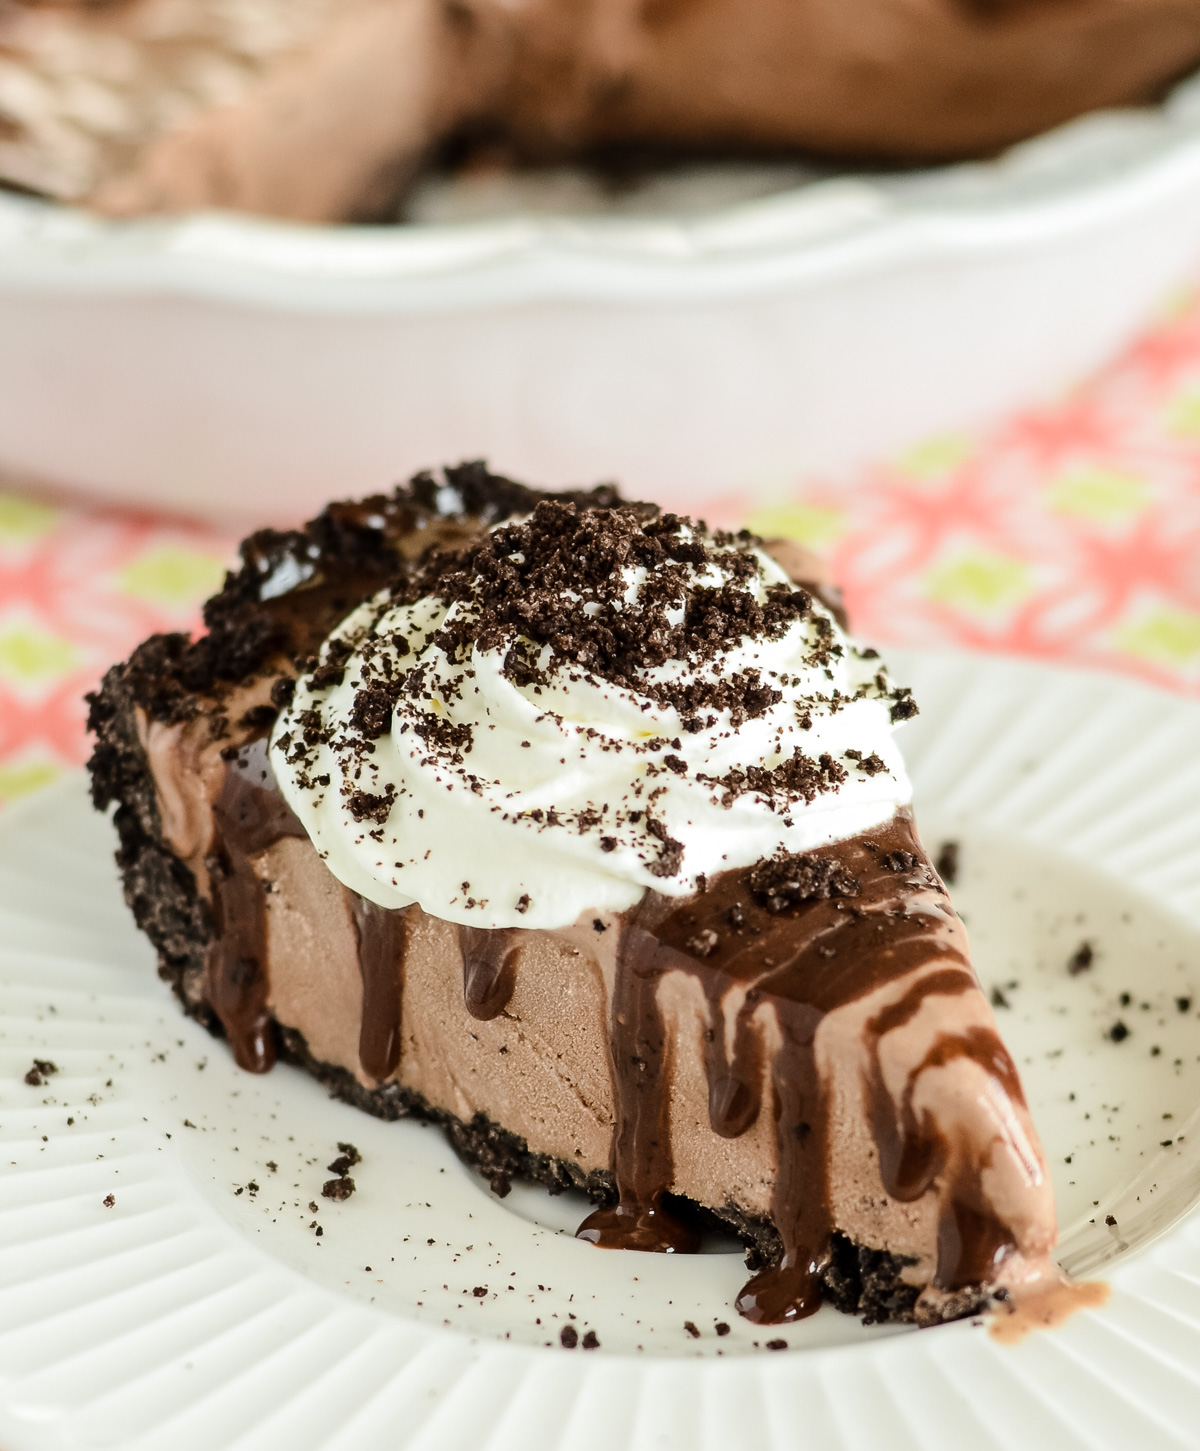 Mud pie recipe sliced and topped with whipped cream and chocolate sauce.